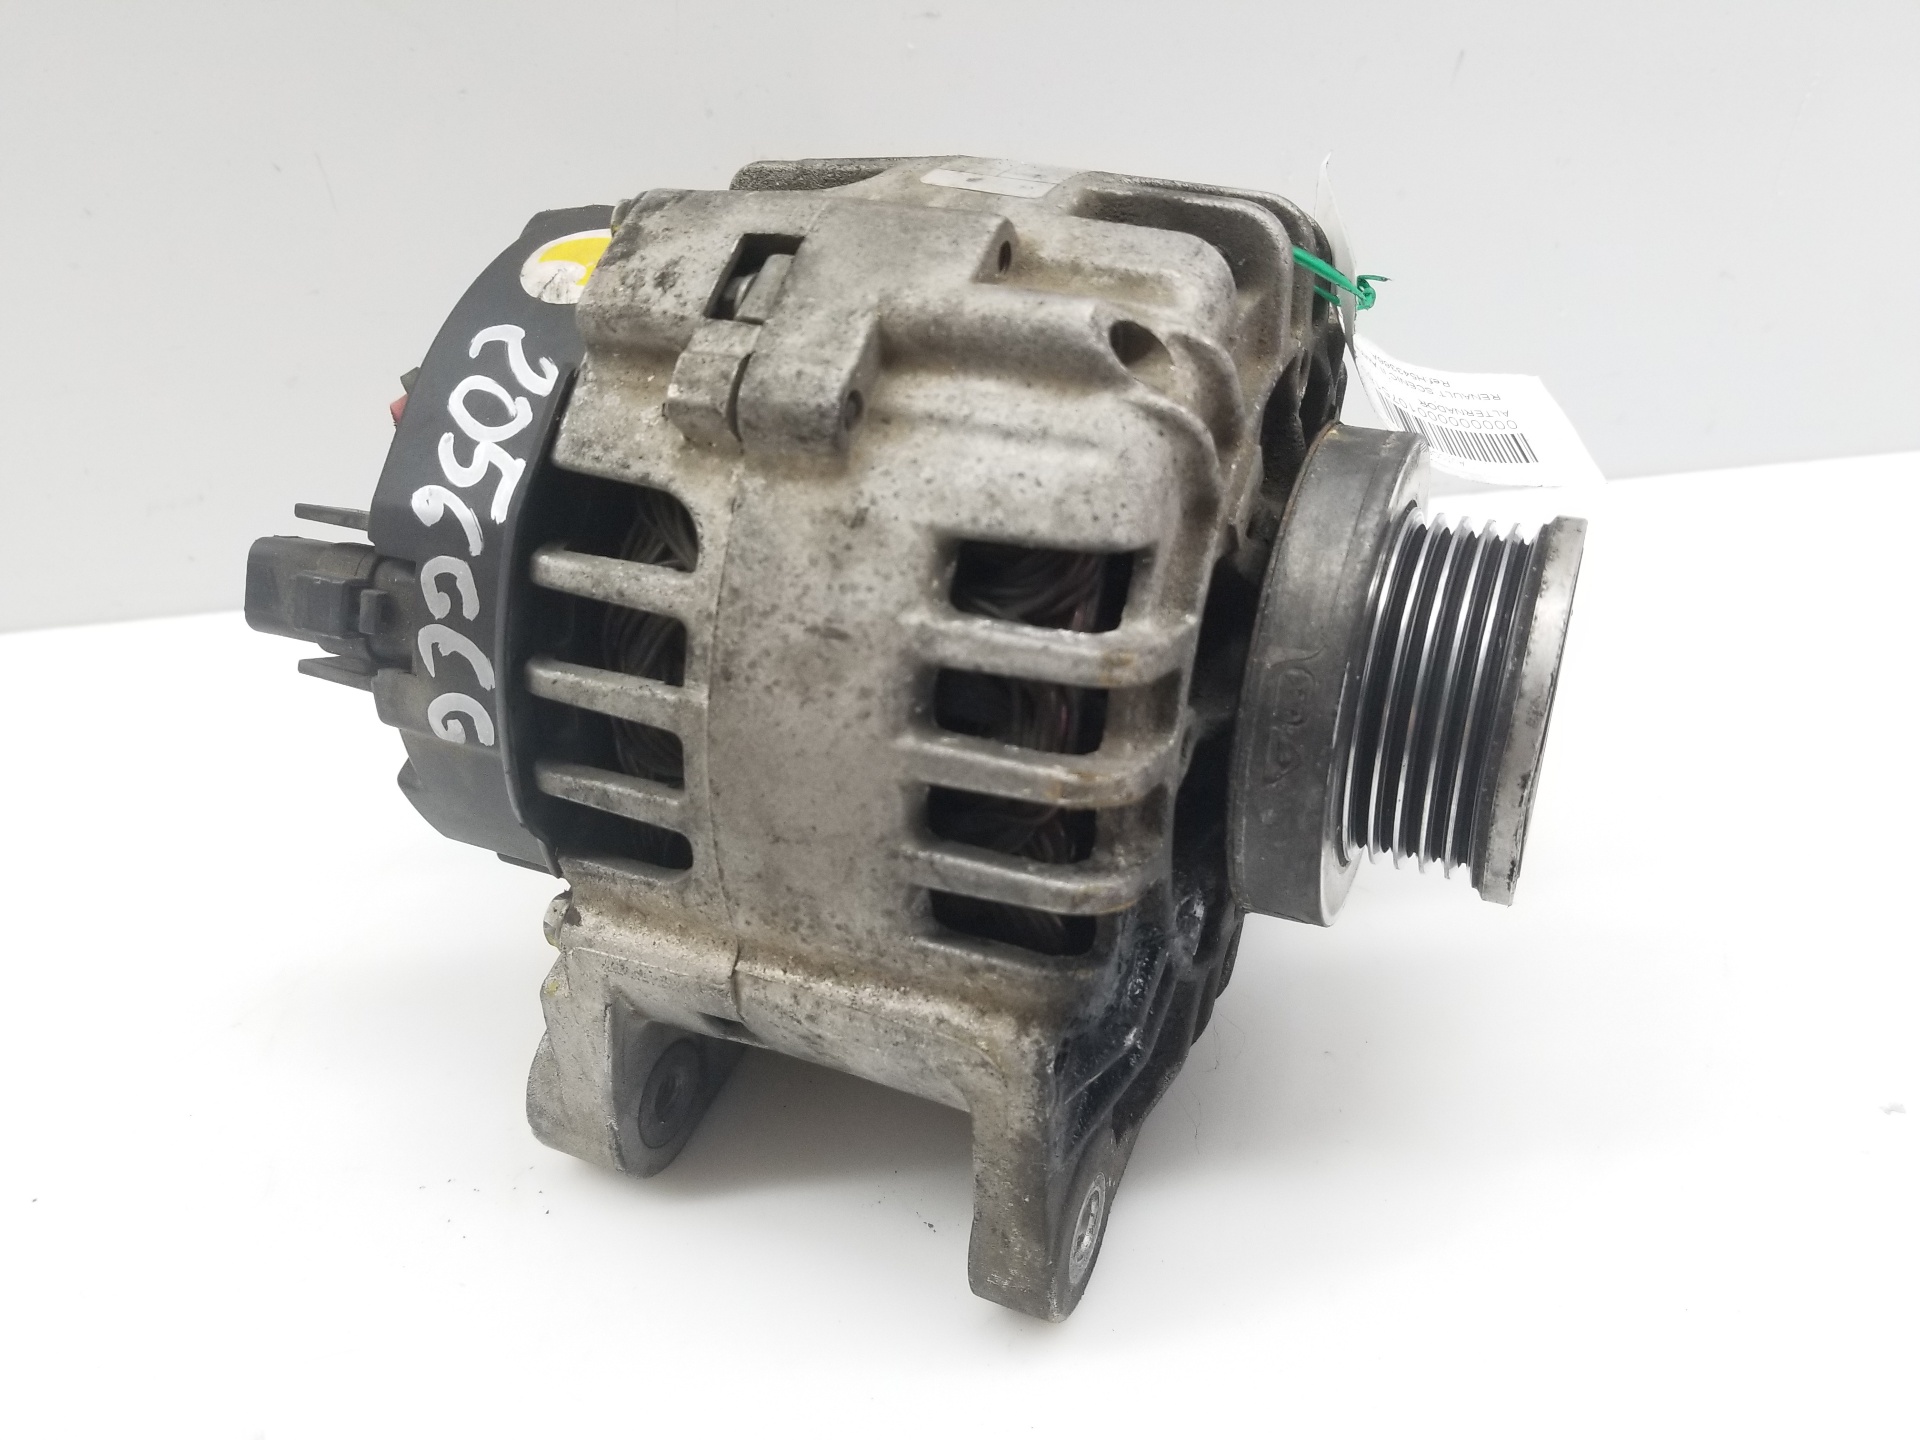 RENAULT Scenic 2 generation (2003-2010) Alternator H543366A, H543366A 25231407